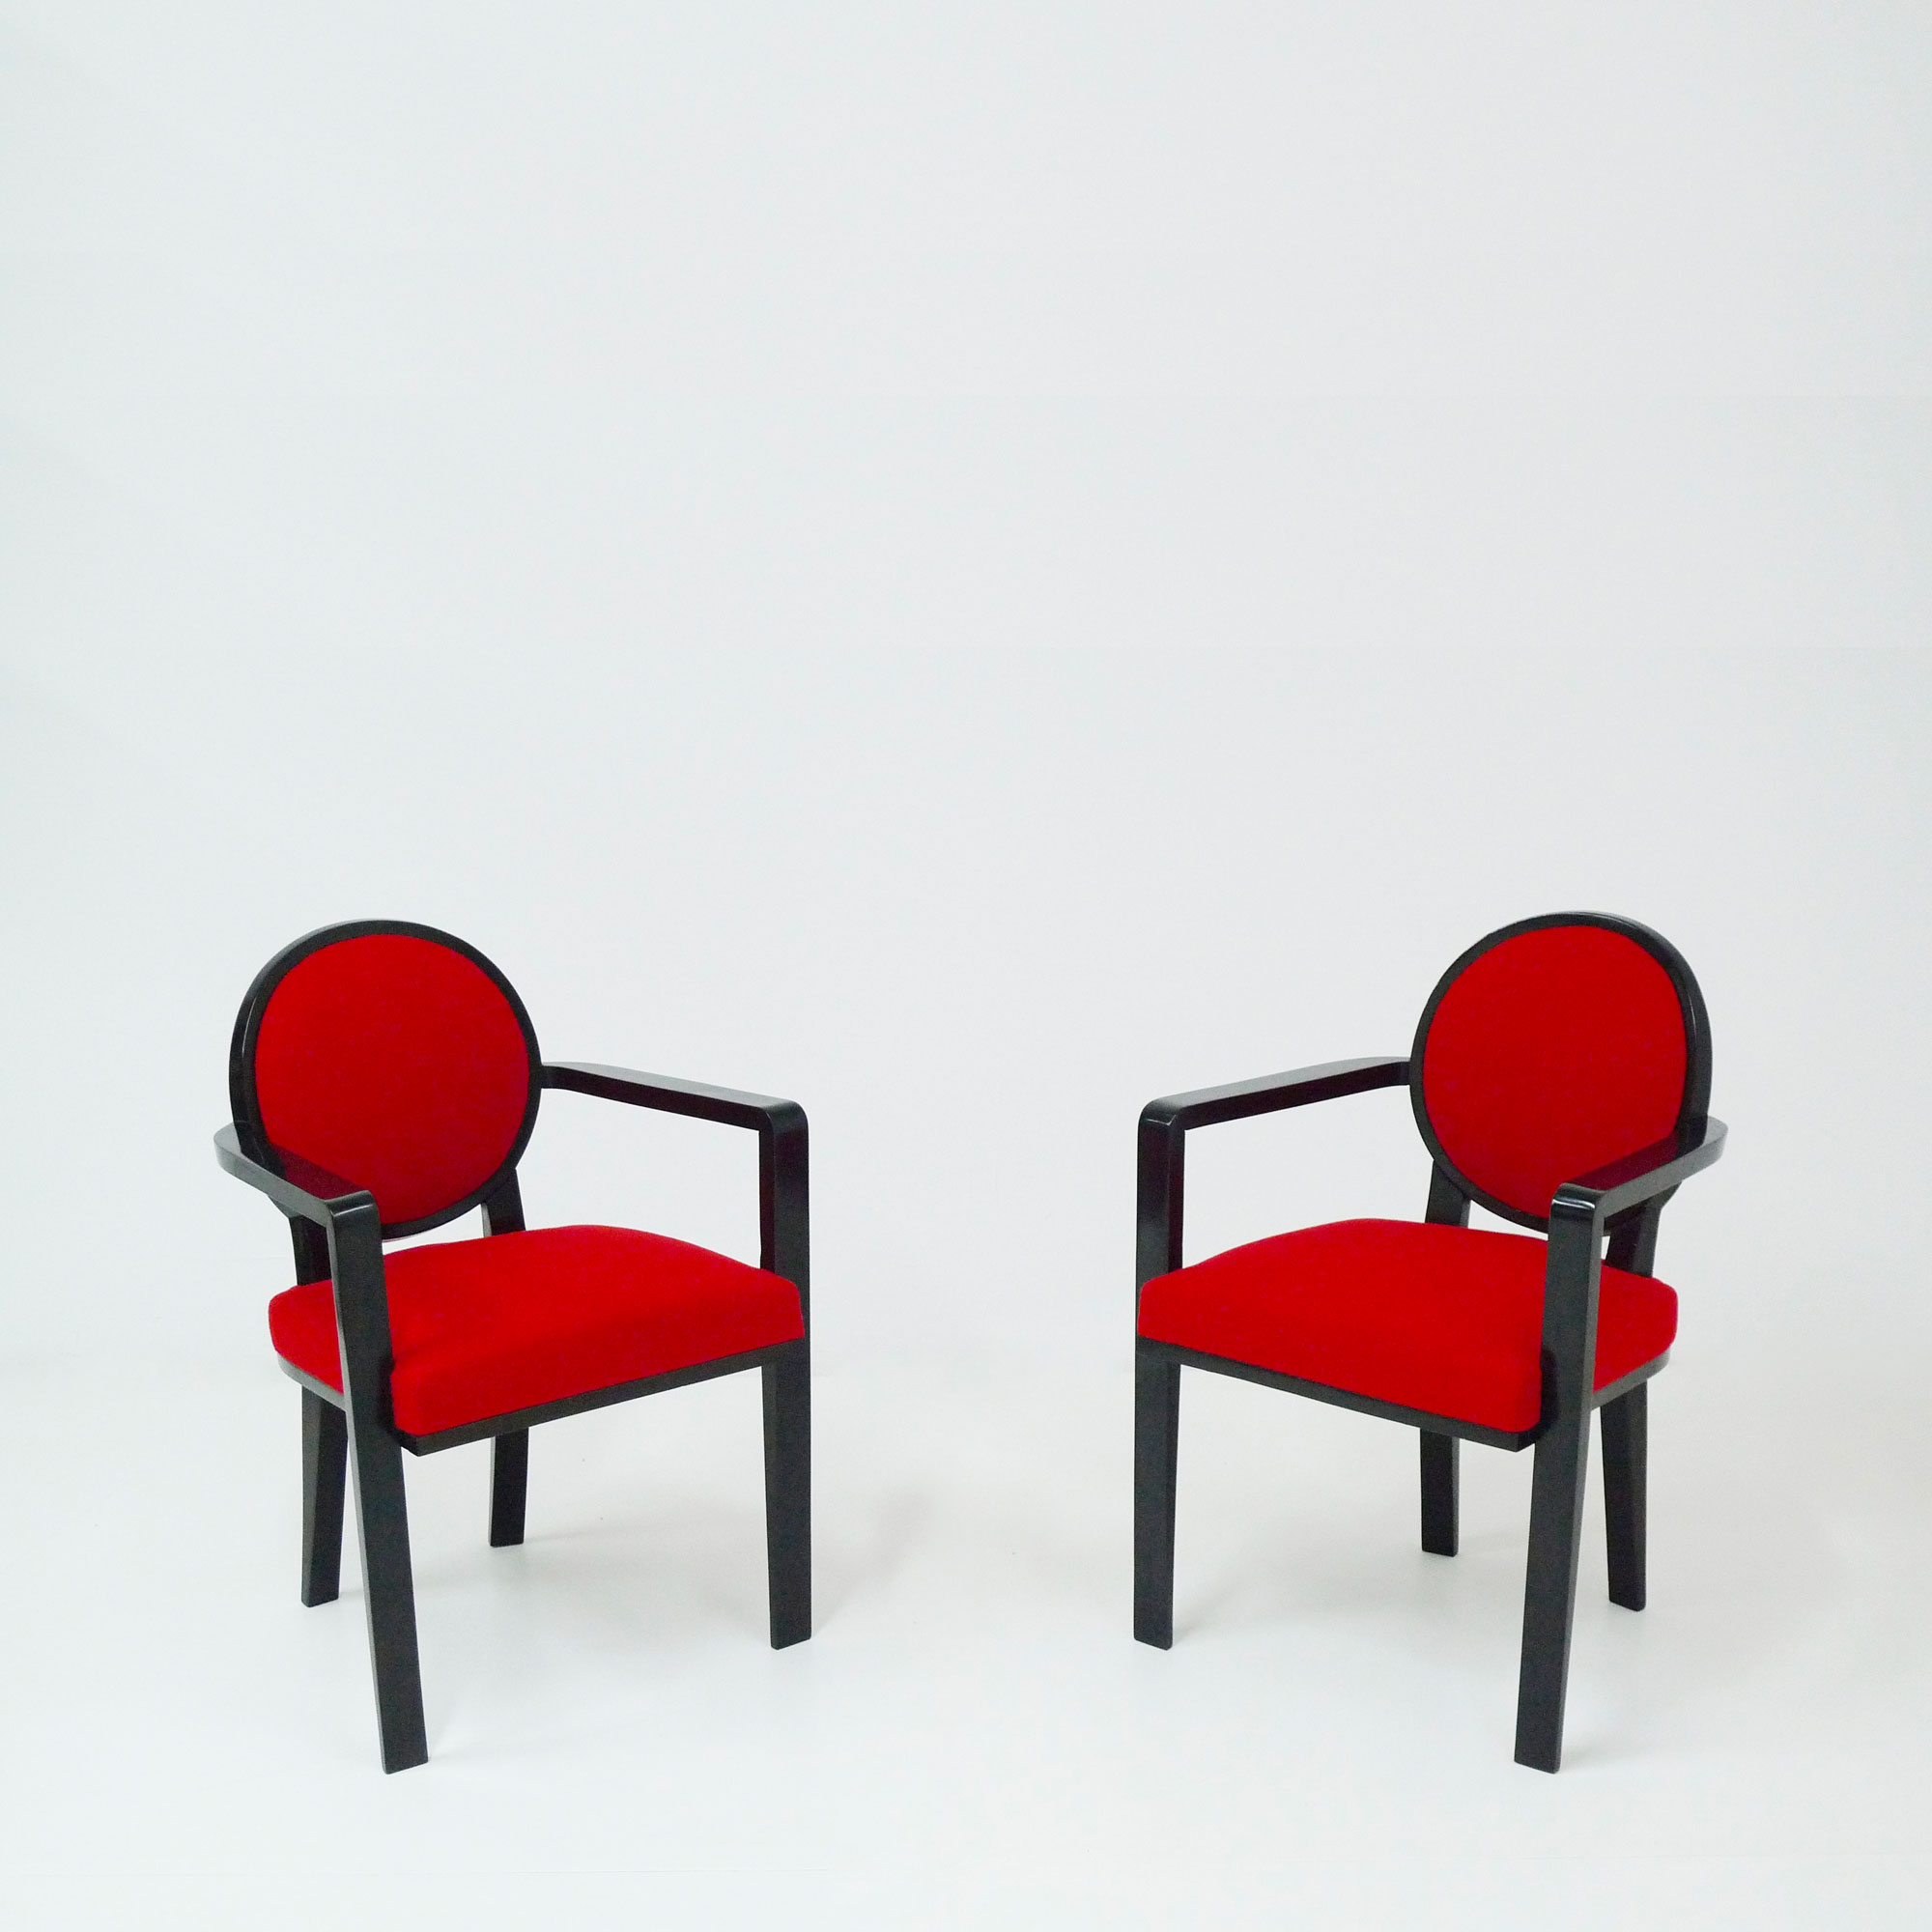 « Drouant » armchairs